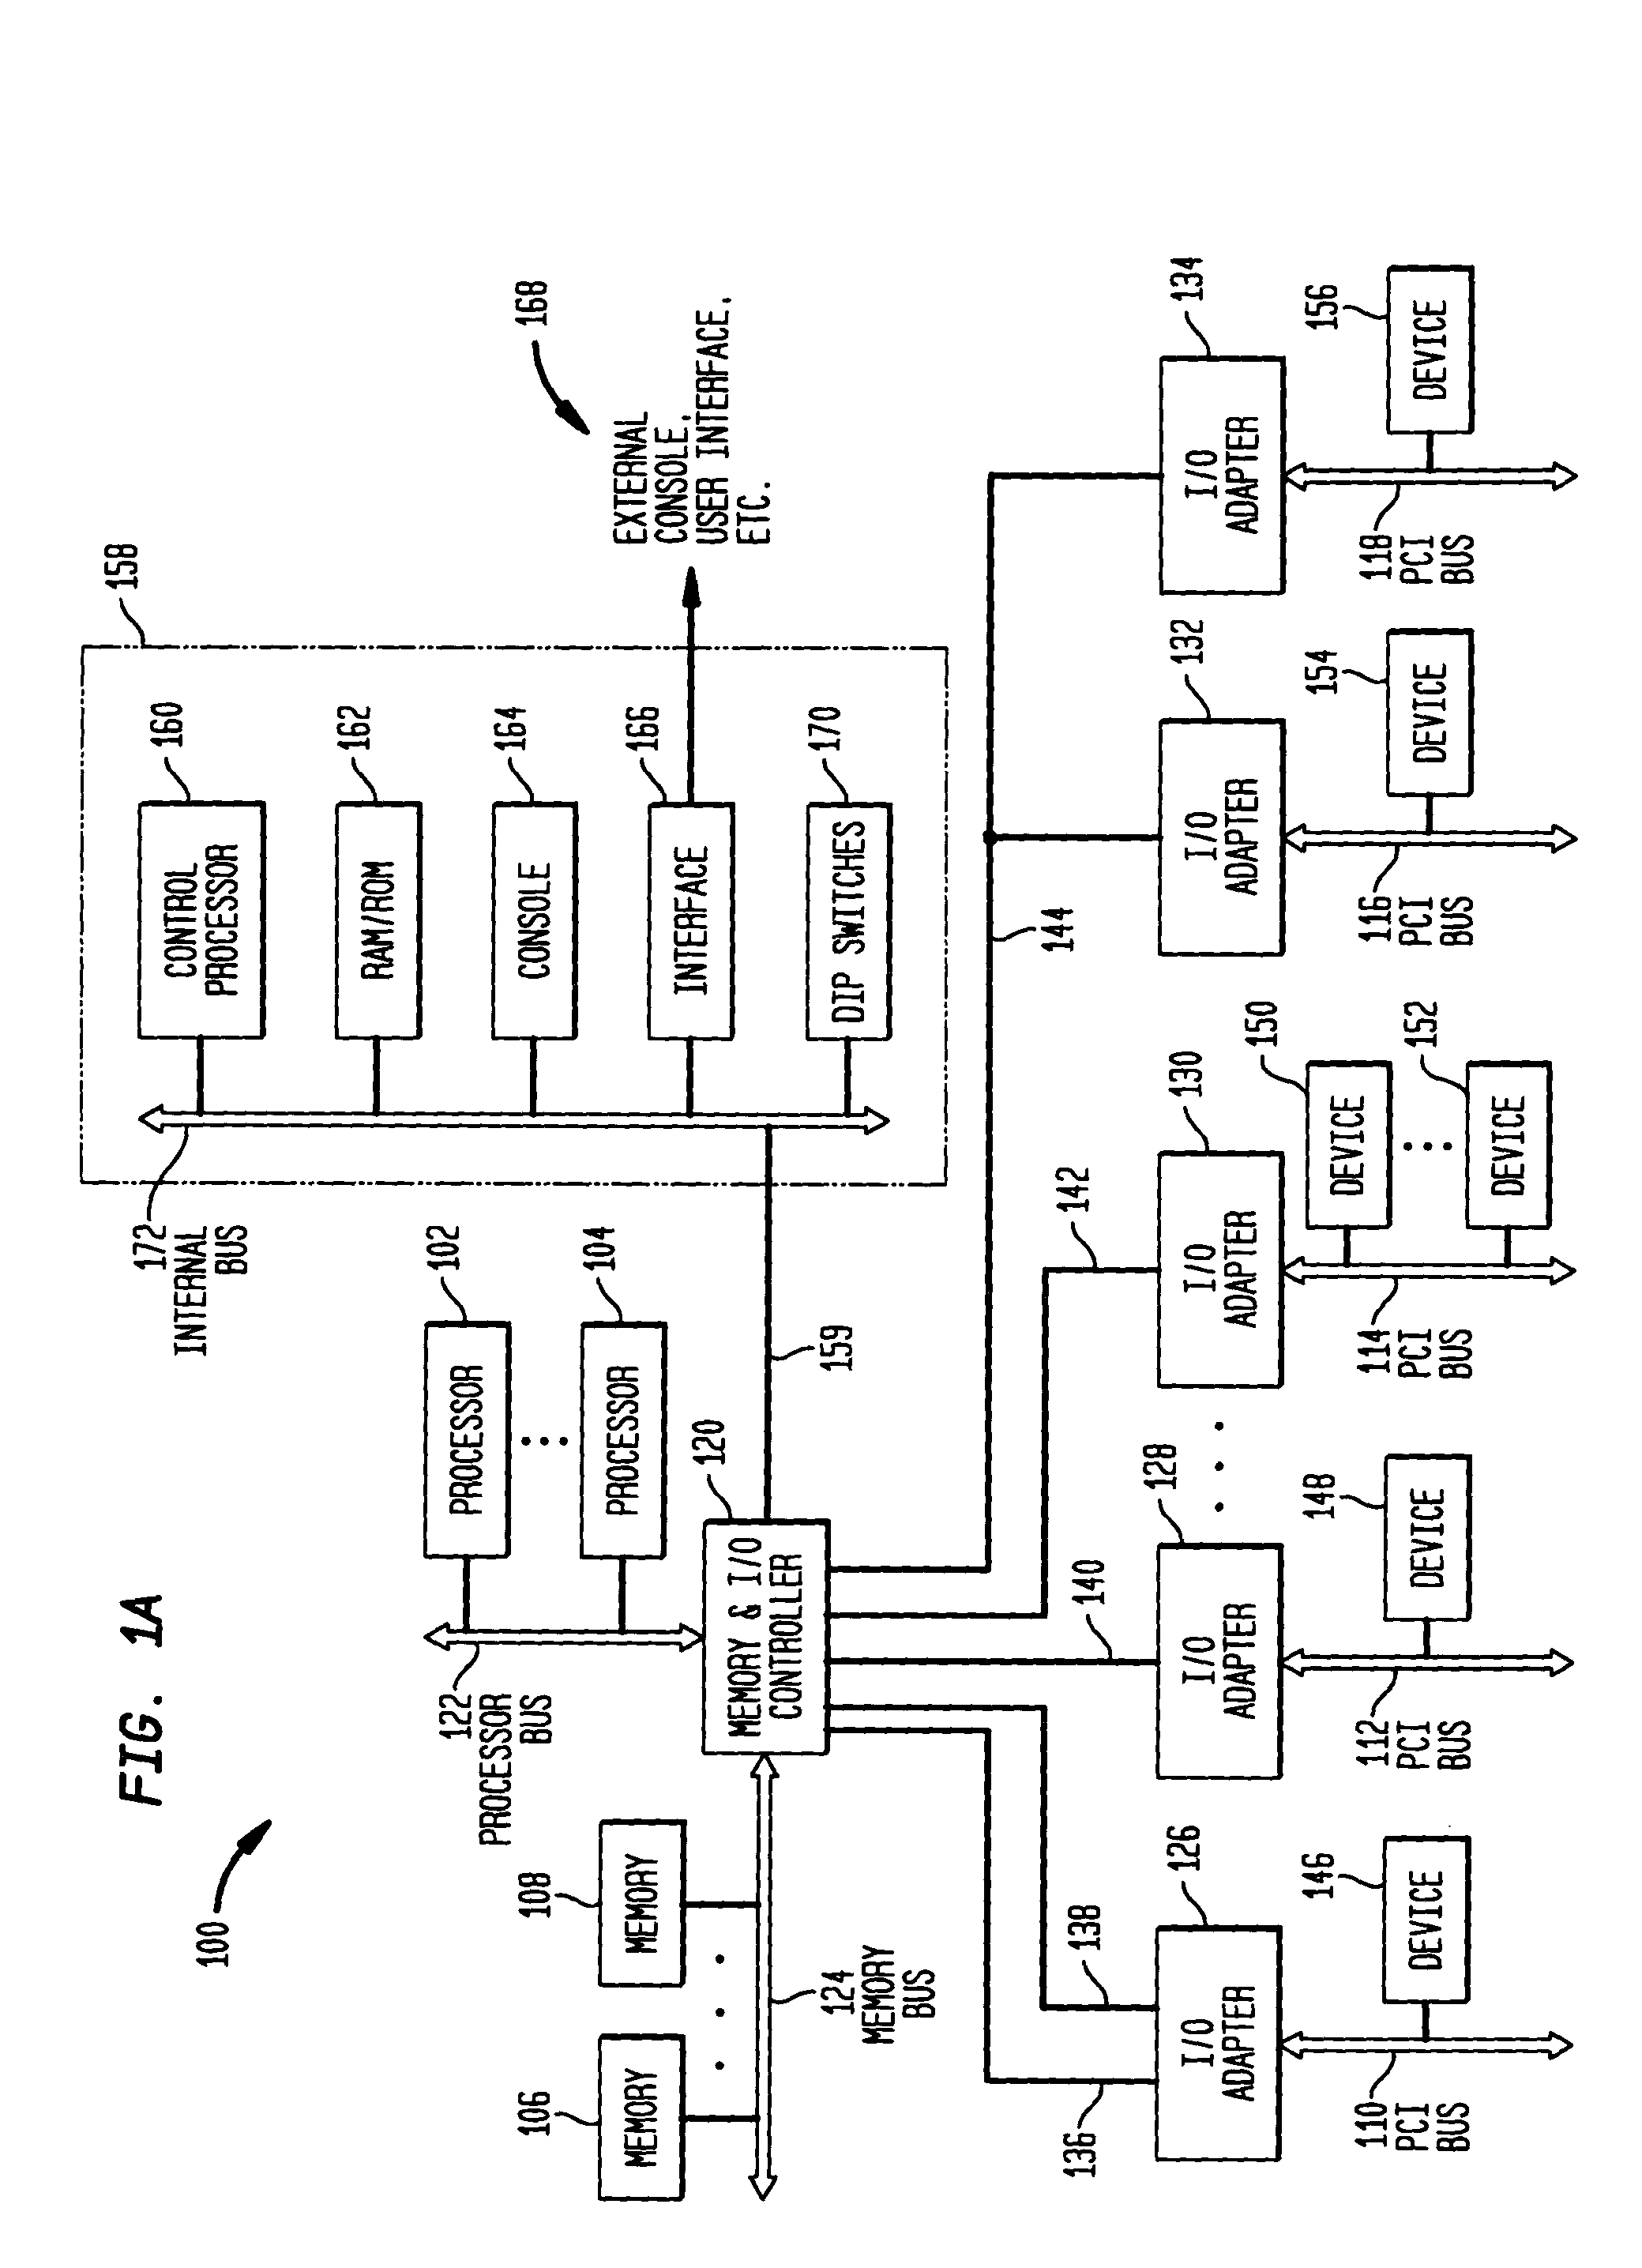 Bus clock frequency management based on device load